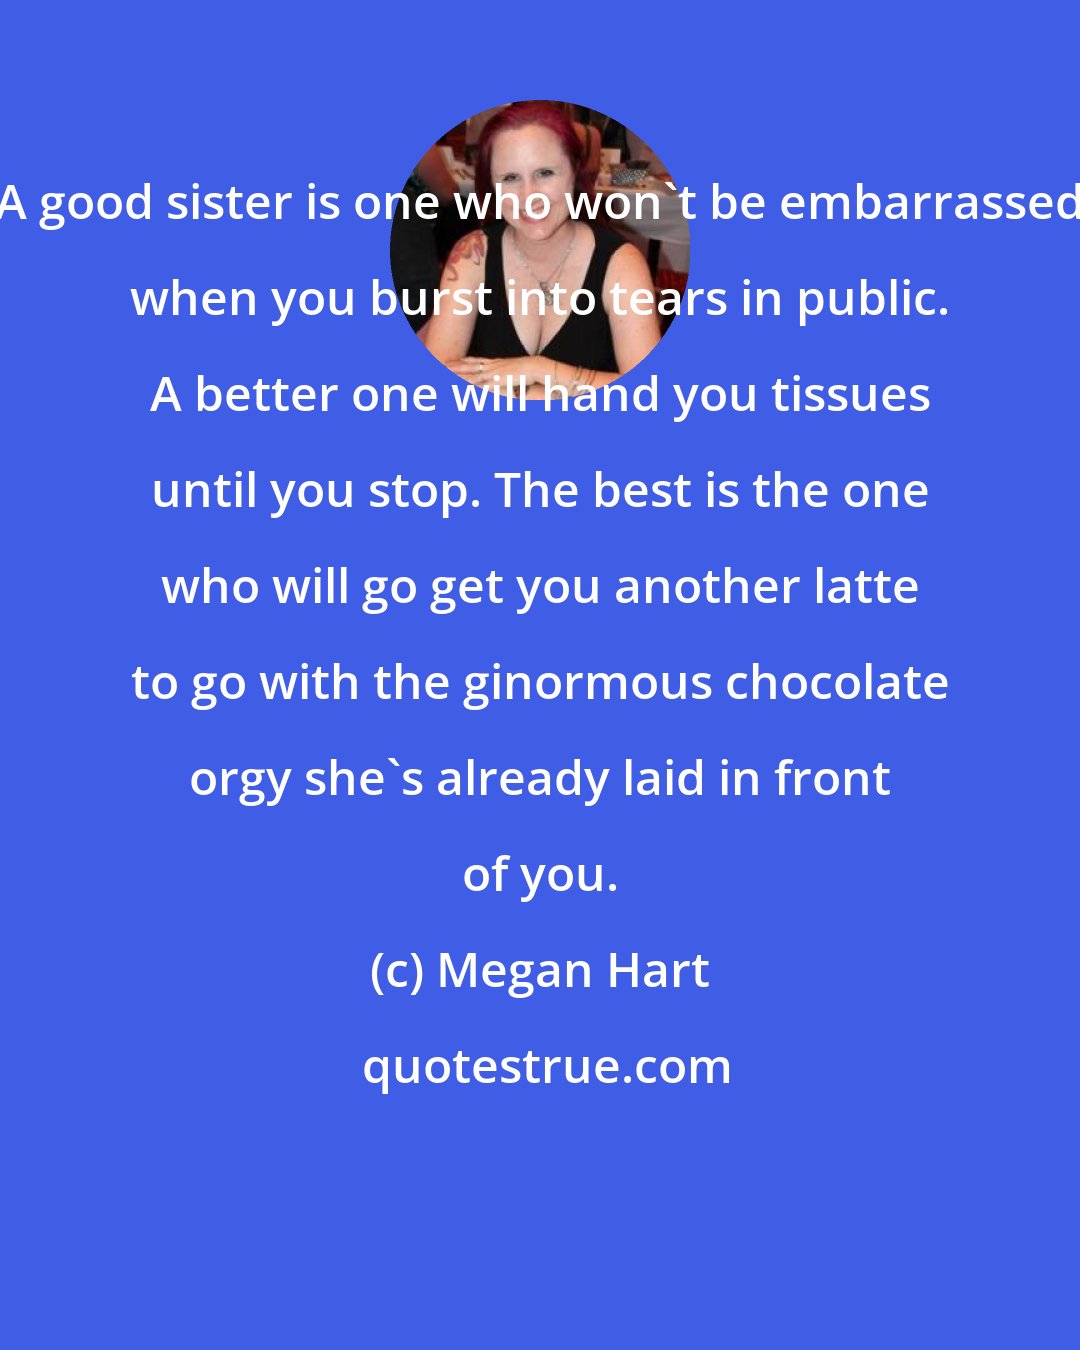 Megan Hart: A good sister is one who won't be embarrassed when you burst into tears in public. A better one will hand you tissues until you stop. The best is the one who will go get you another latte to go with the ginormous chocolate orgy she's already laid in front of you.